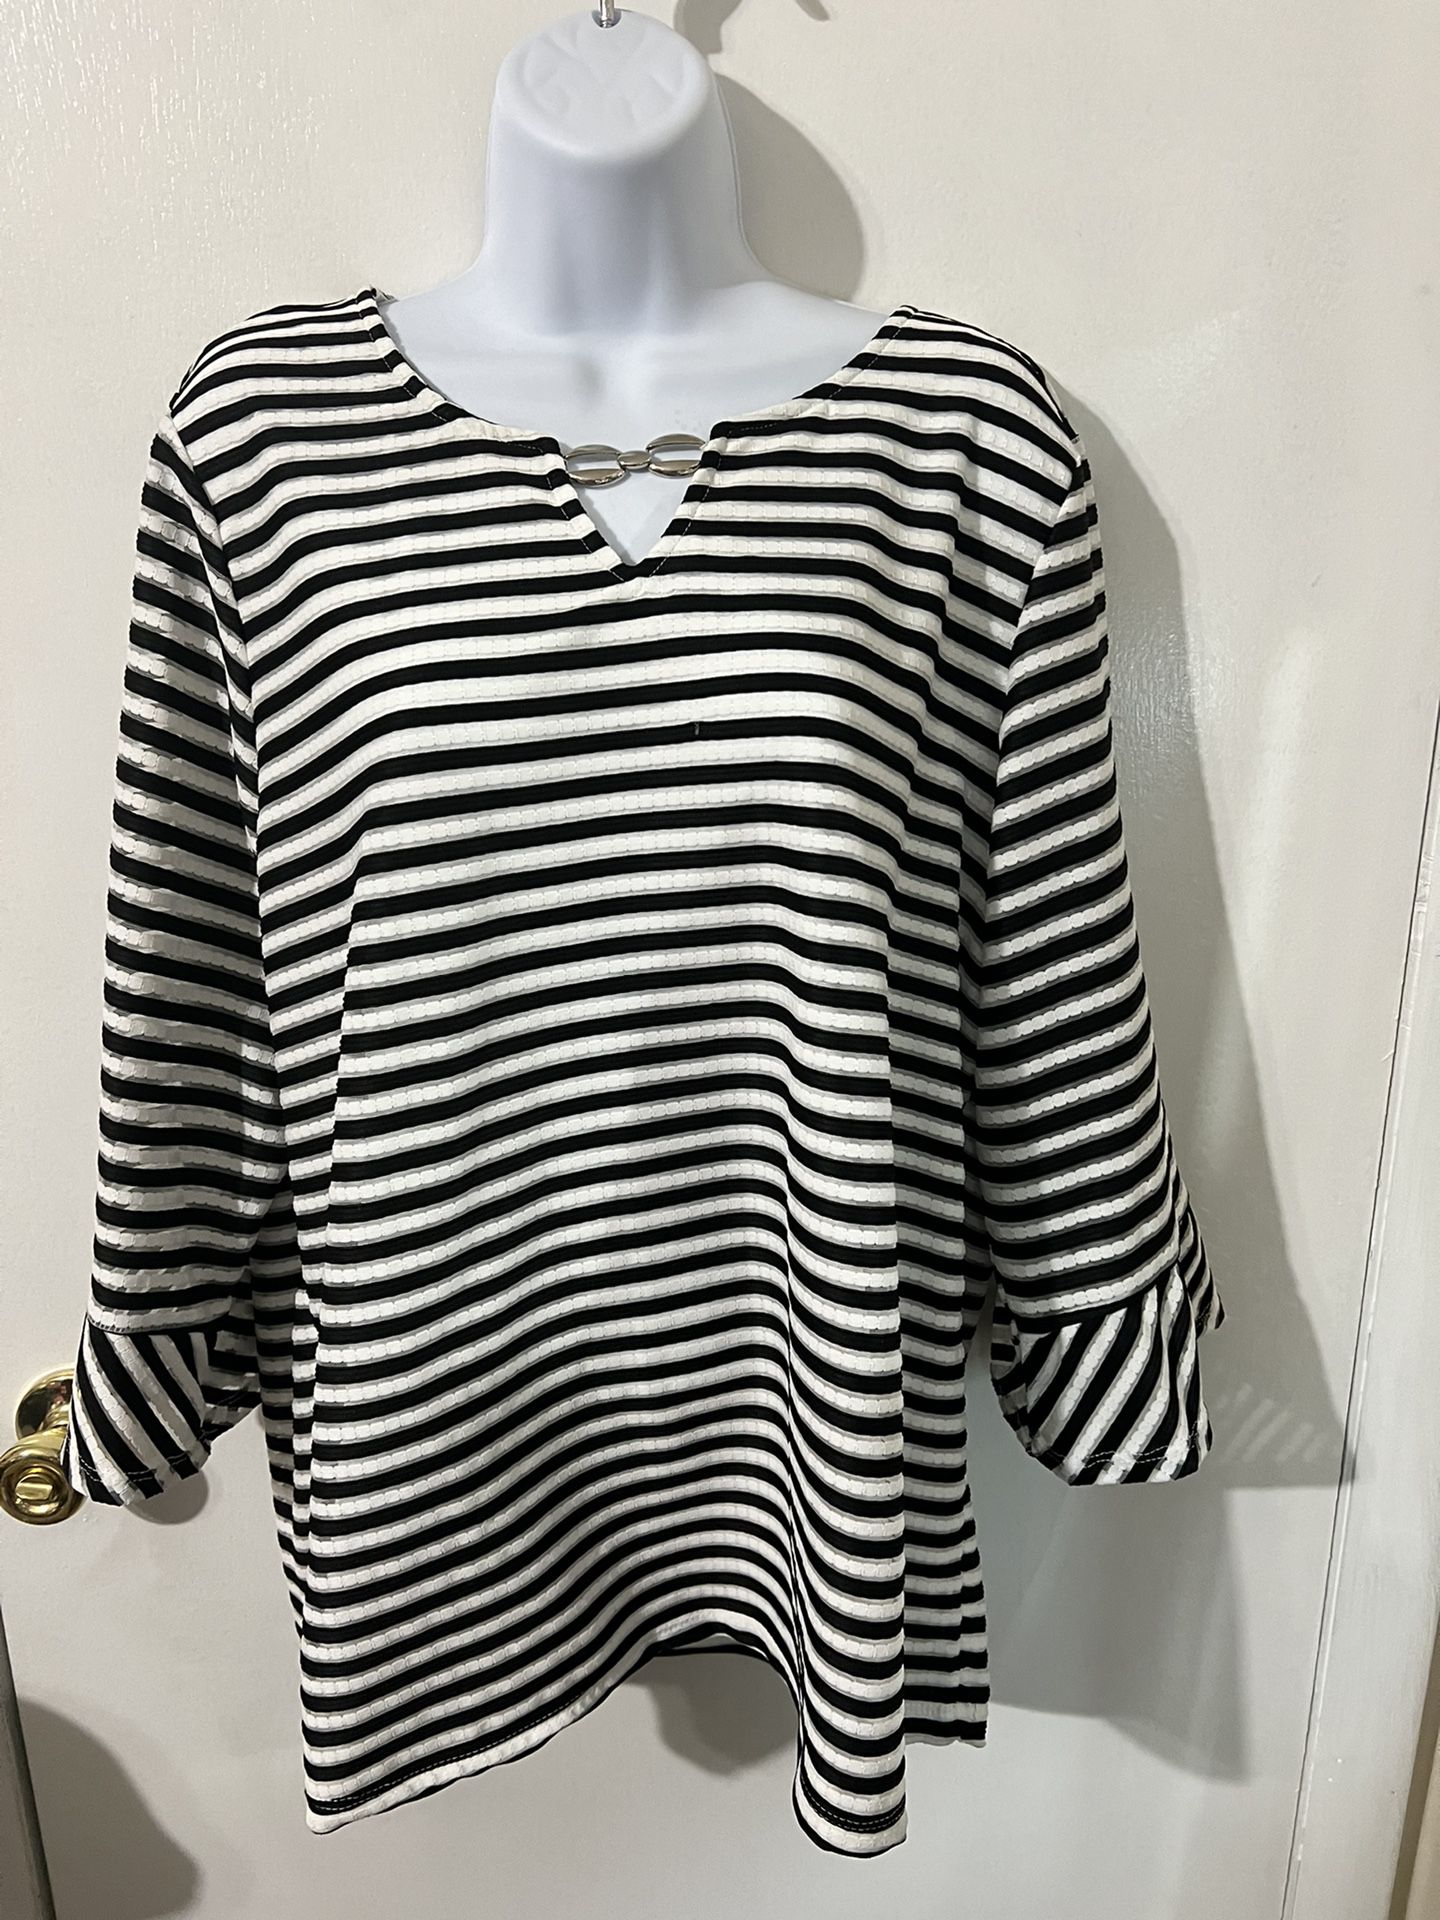 Long Sleeve Black And White Shirt *SALE!!!  Now $10